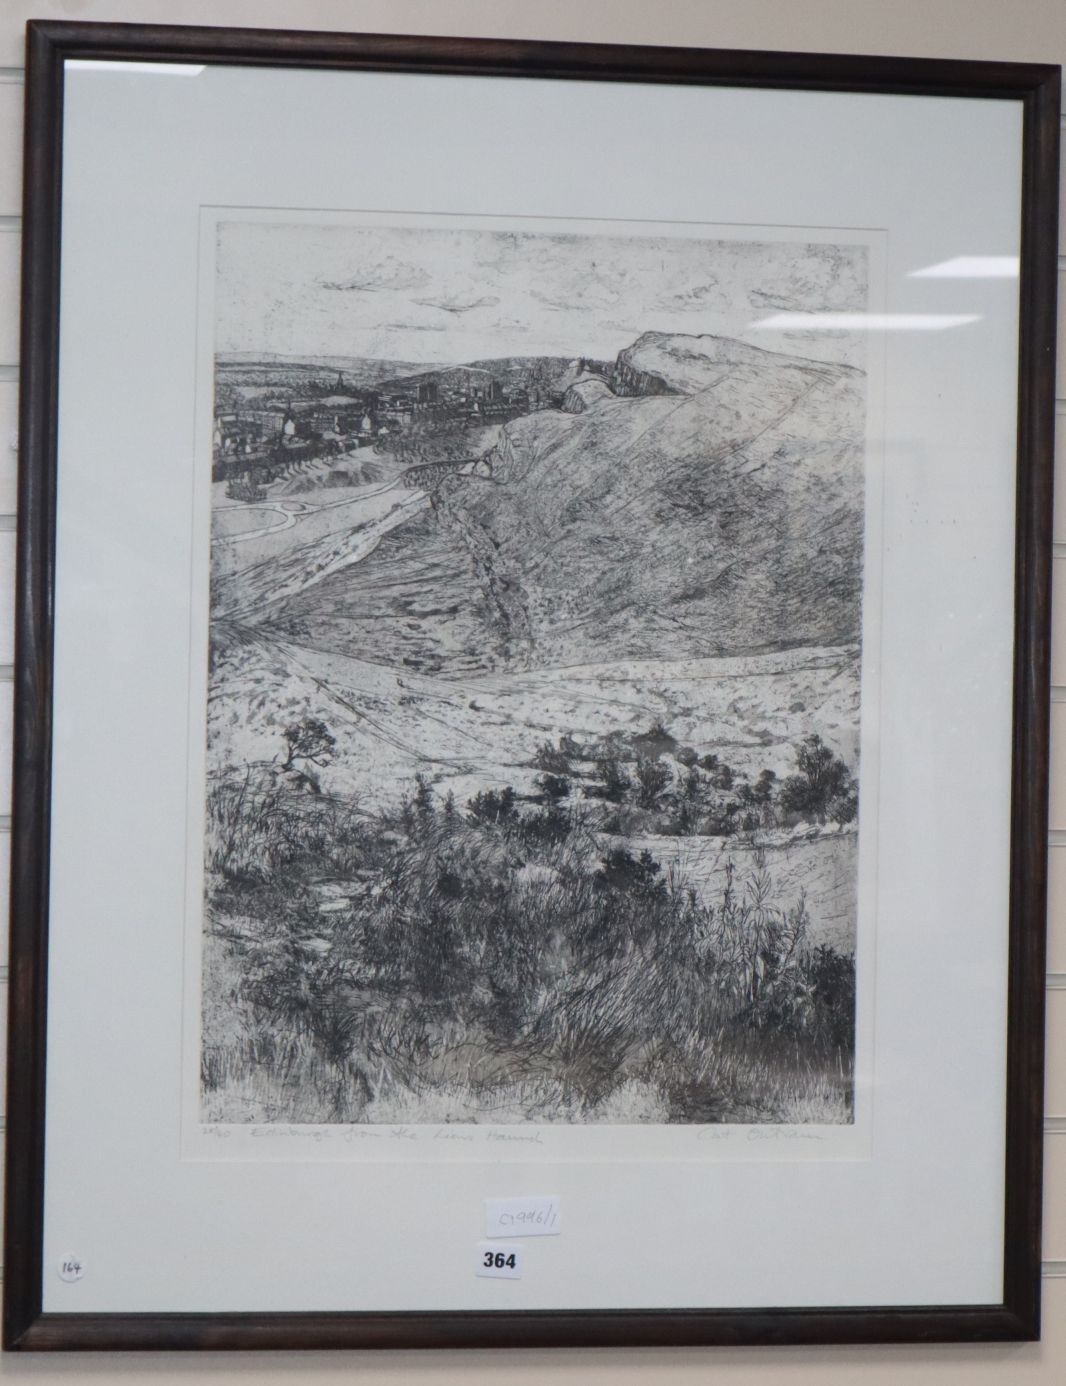 Cat Outram (Scottish contemporary) Edinburgh from the Lions Haunch, Limited Edition engraving,